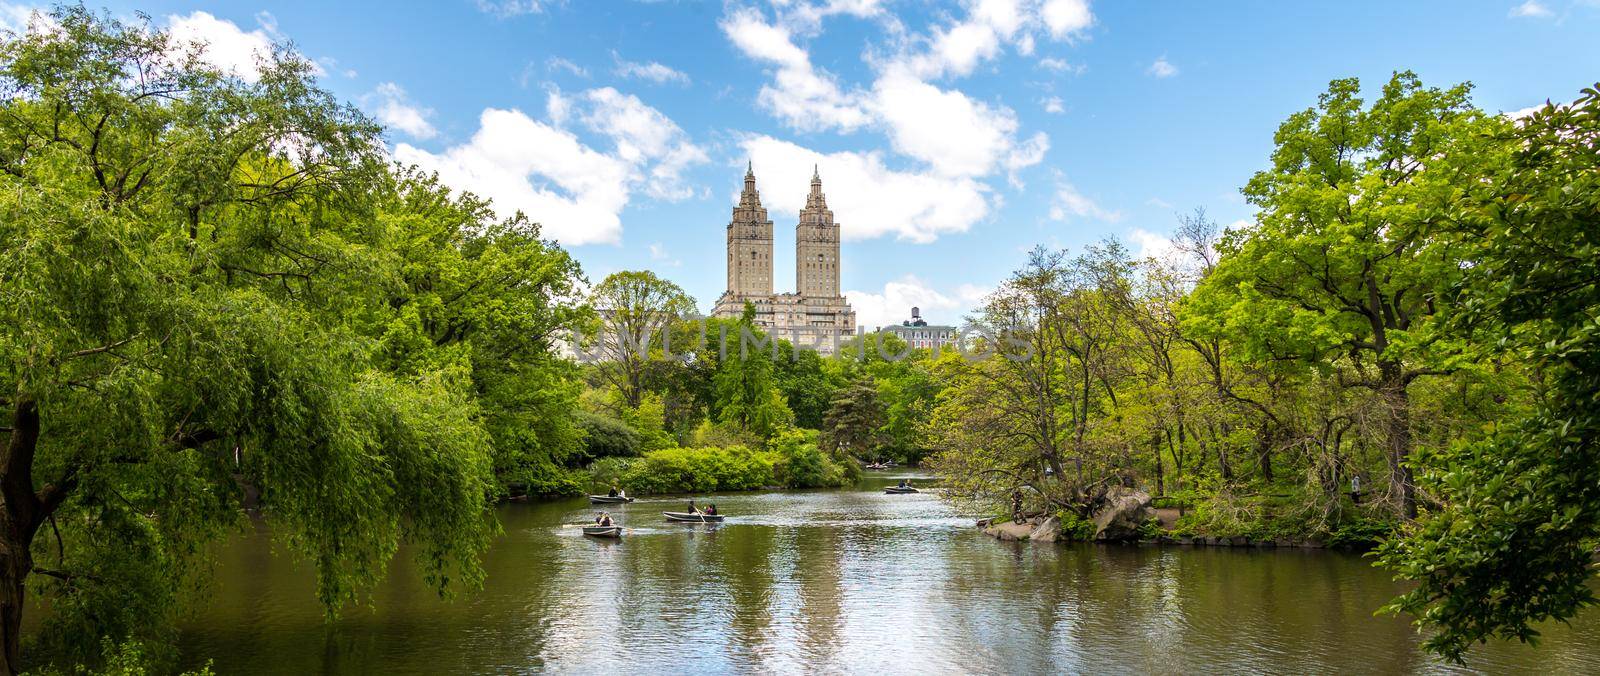 New york, USA - May 15, 2019: Row boats in lake in Central Park with Eldorado building in distance, Manhattan, New York city, USA by Mariakray